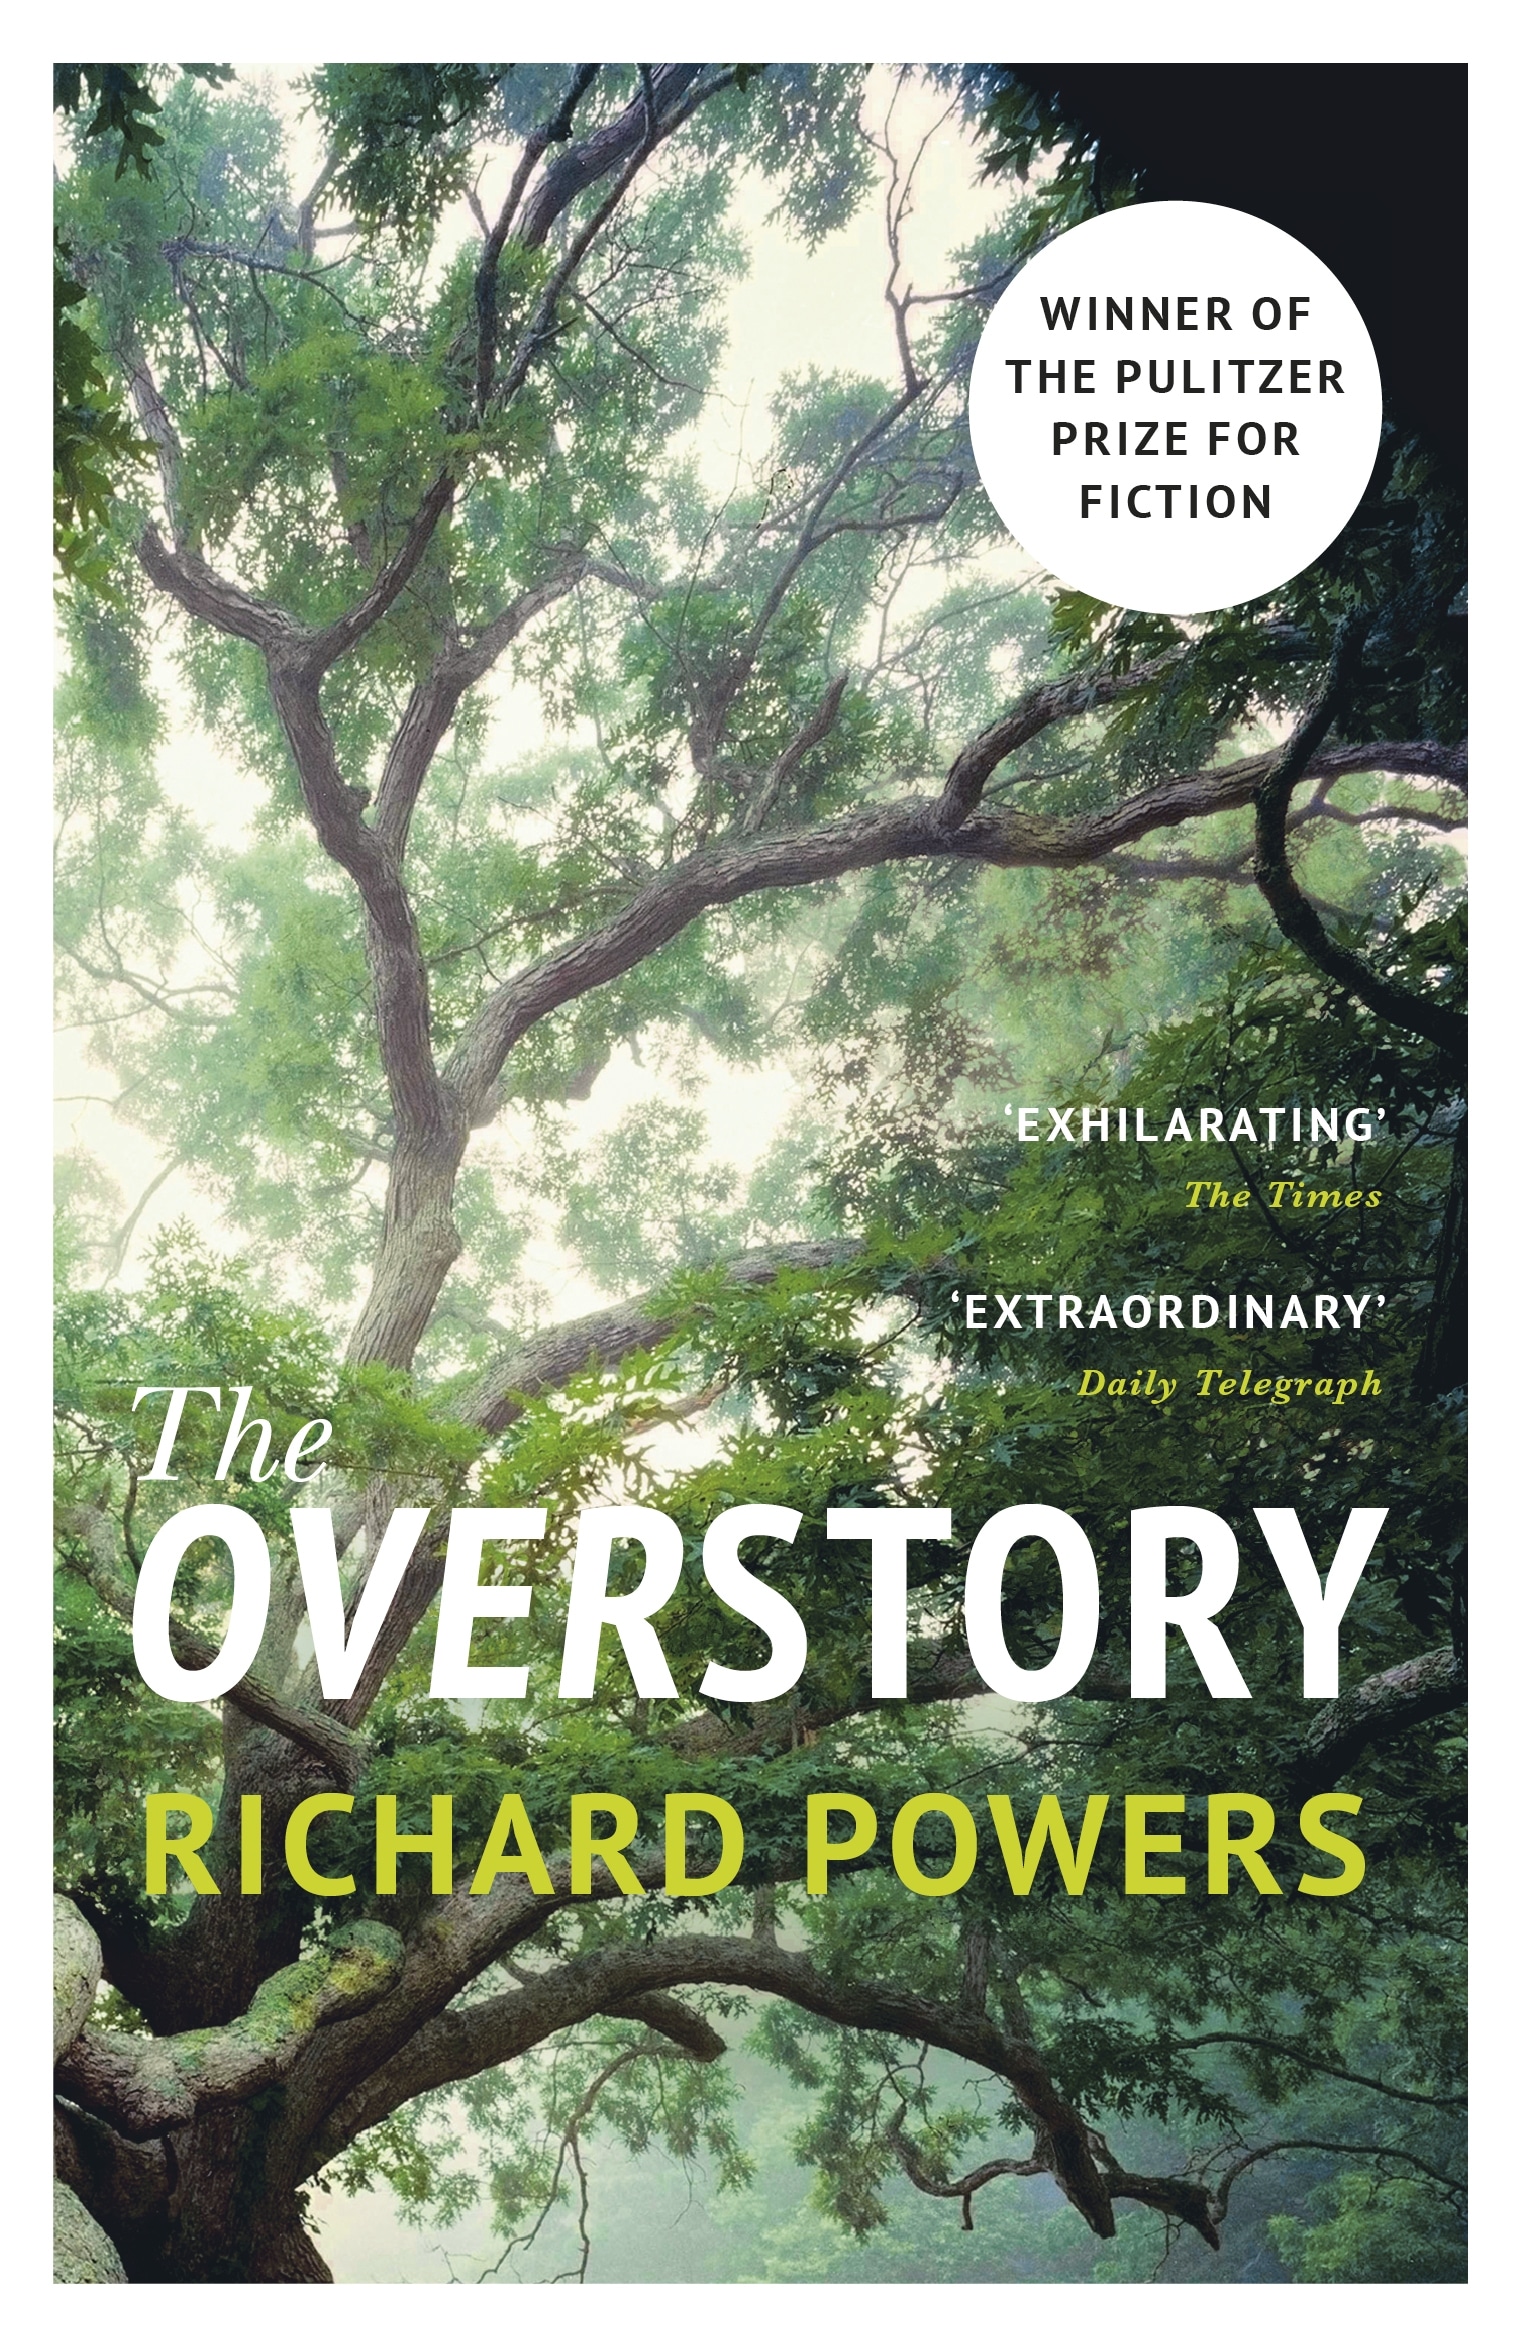 Book “The Overstory” by Richard Powers — April 11, 2019